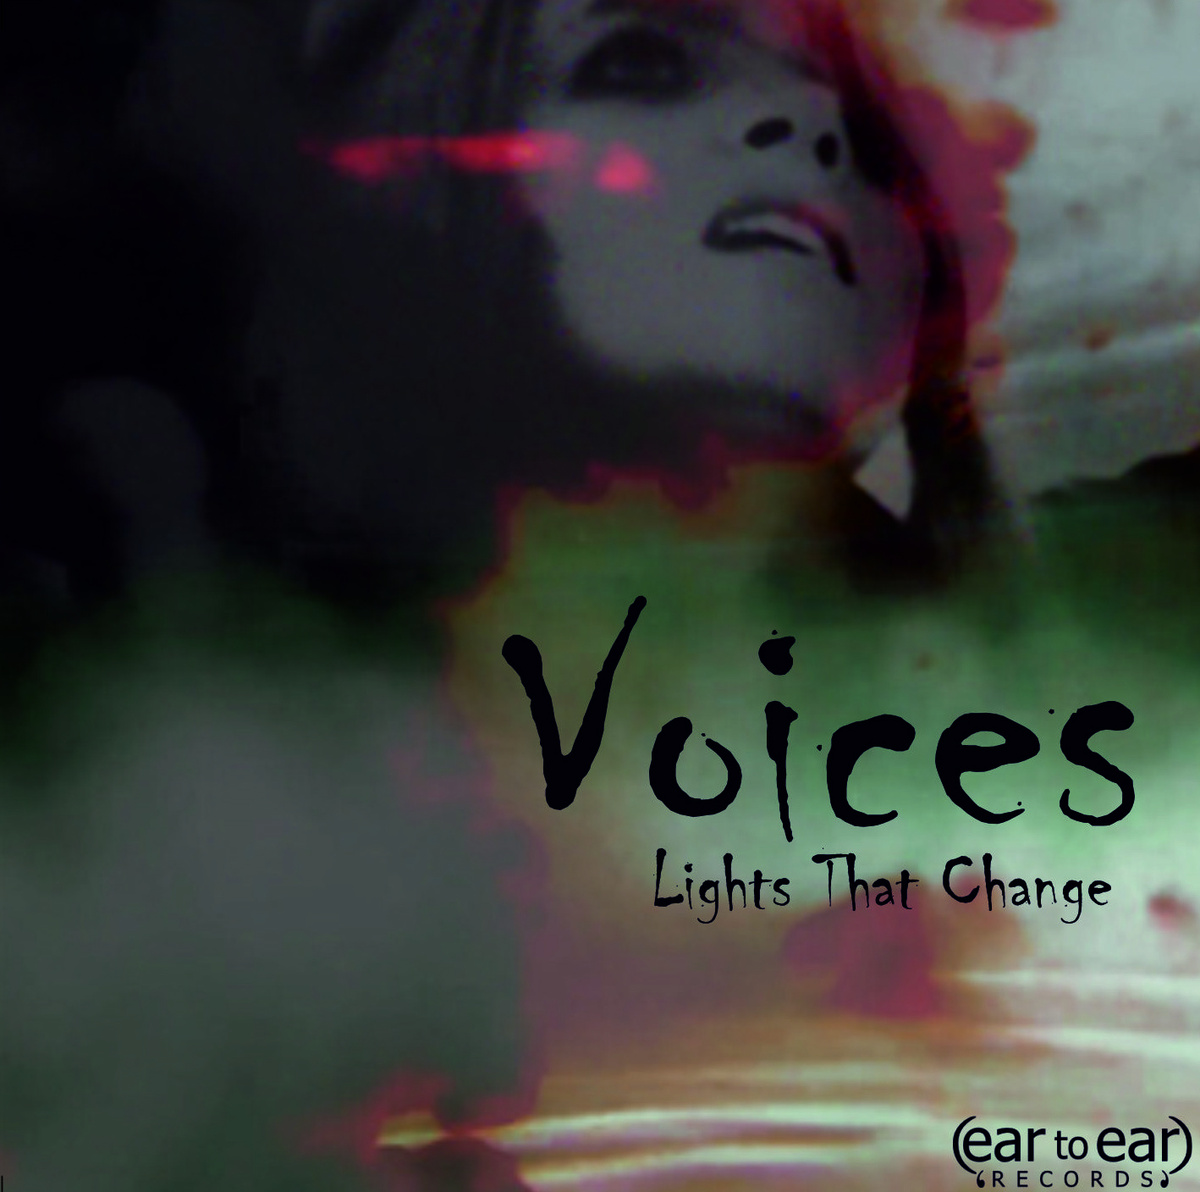 Songs They Send Us: Lights That Change Hear "Voices"